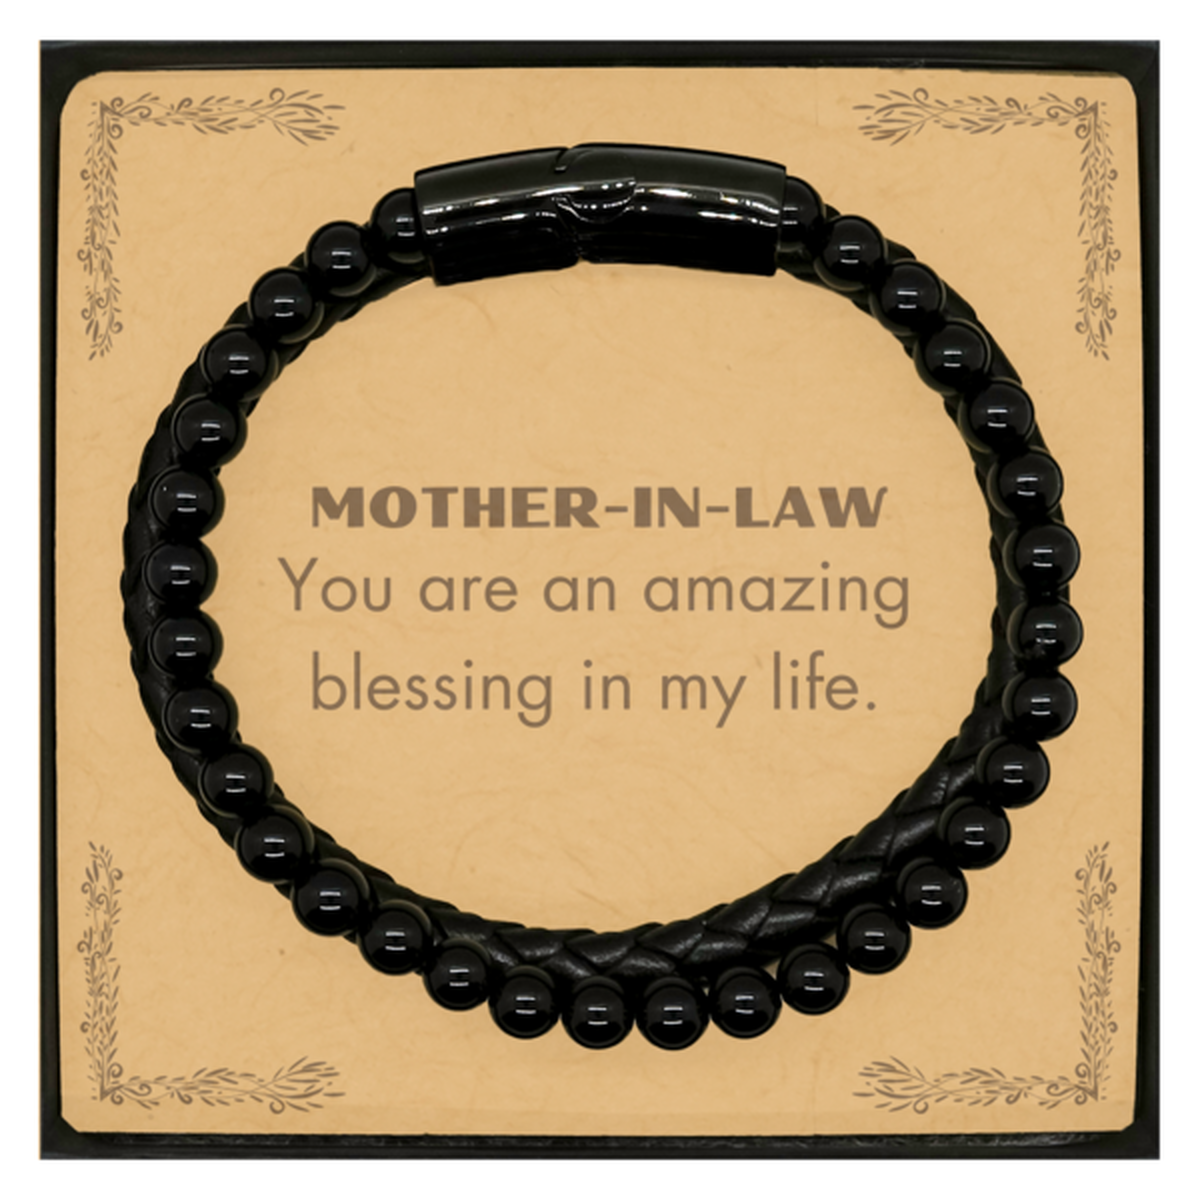 Mother-In-Law Stone Leather Bracelets, You are an amazing blessing in my life, Thank You Gifts For Mother-In-Law, Inspirational Birthday Christmas Unique Gifts For Mother-In-Law